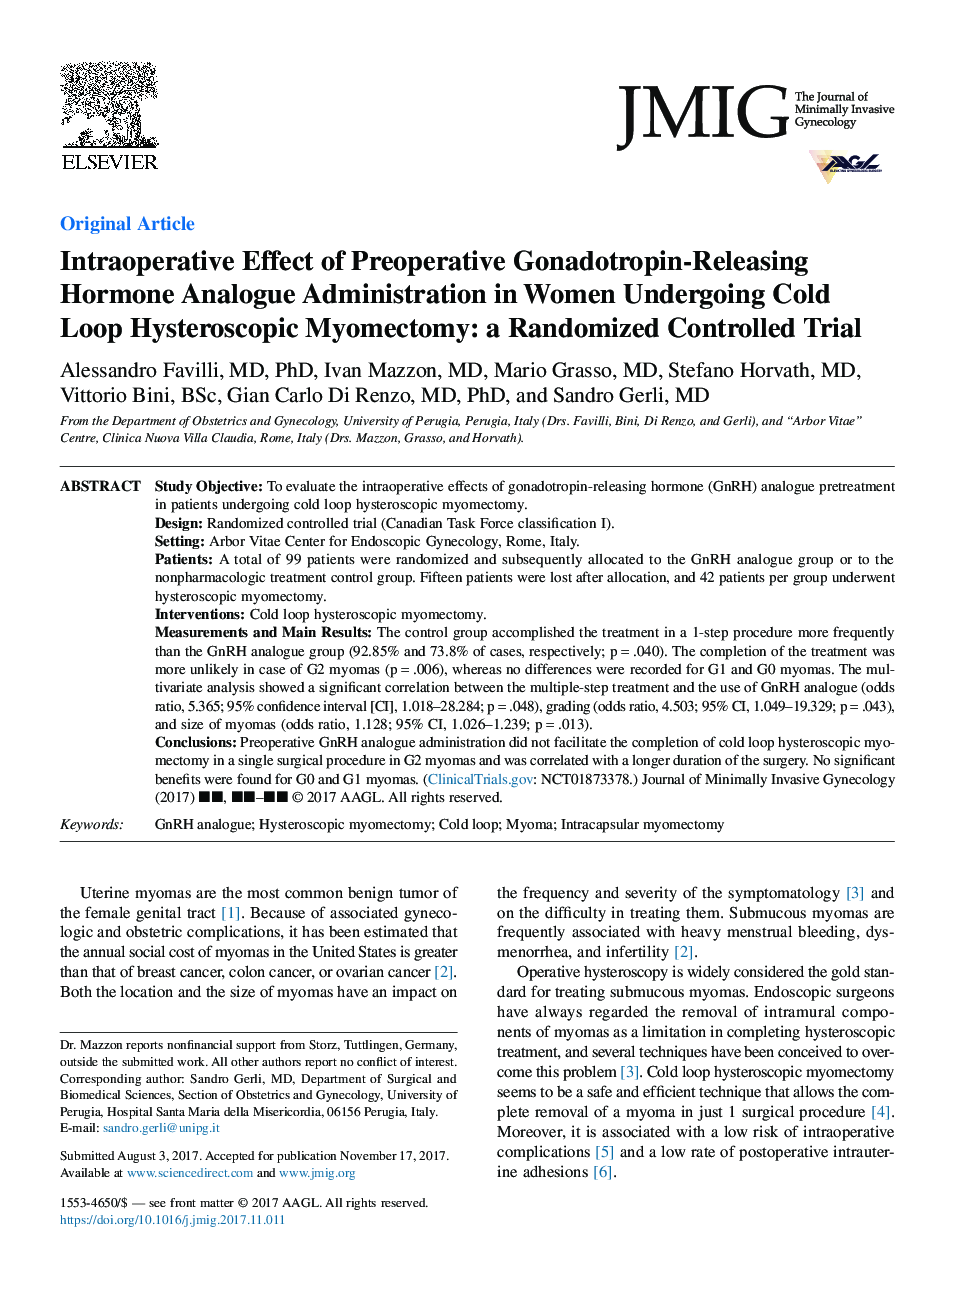 Intraoperative Effect of Preoperative Gonadotropin-Releasing Hormone Analogue Administration in Women Undergoing Cold Loop Hysteroscopic Myomectomy: A Randomized Controlled Trial